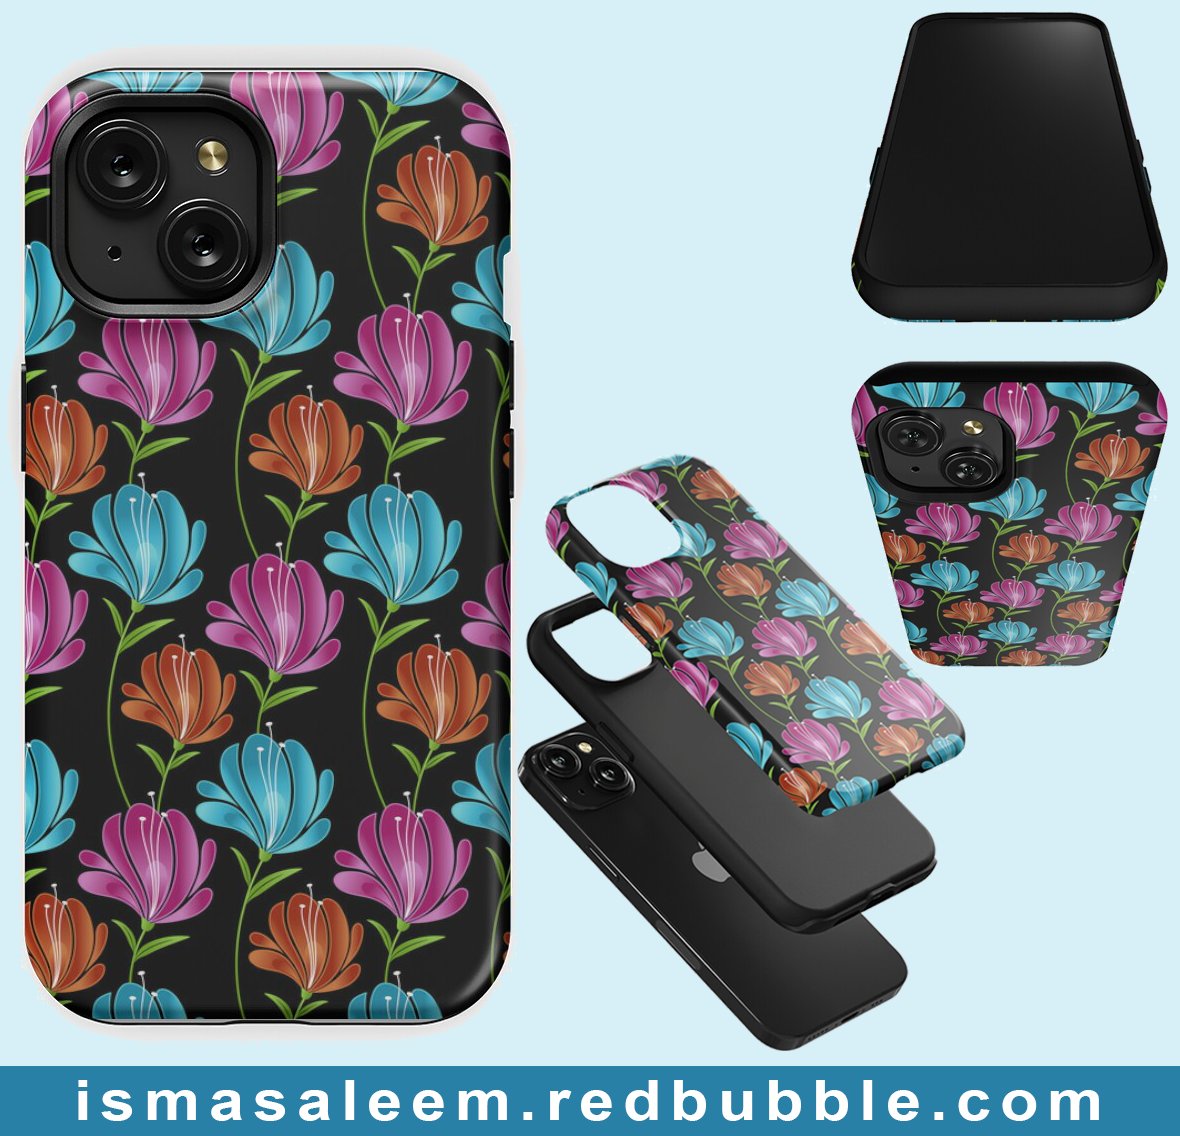 30% OFF

Floral iPhone Case
redbubble.com/i/iphone-case/…
@redbubble #redbubble #iPhonecase #iPhone #phonecase #redbubbleartist #findyourthing #RBandME #art #floral #giftforher #ChristmasGiftidea #giftidea #buyintoart #AYearForArt #sale #discount